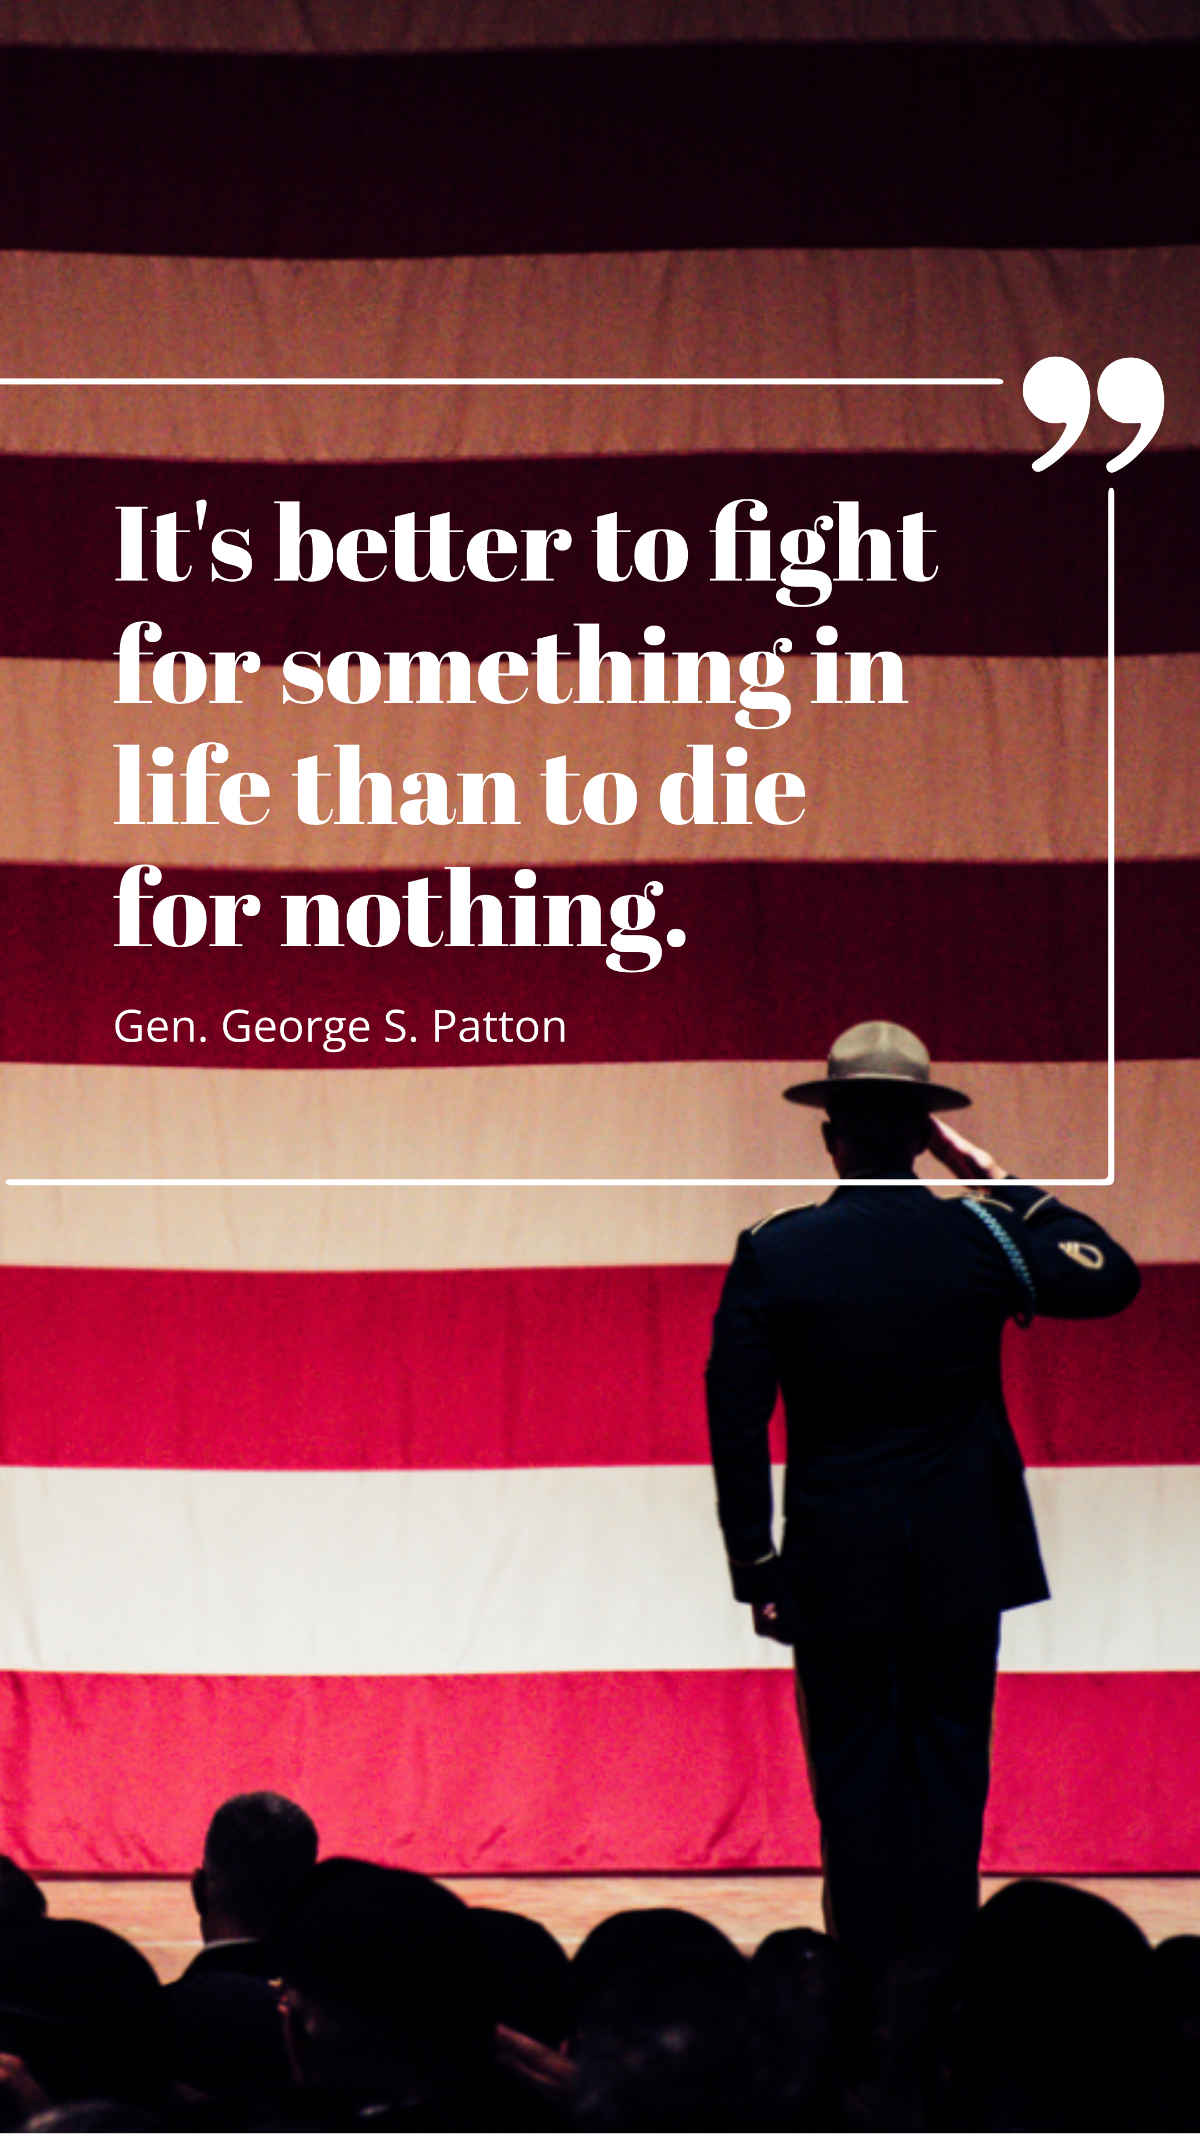 Gen. George S. Patton - It's better to fight for something in life than to die for nothing. Template